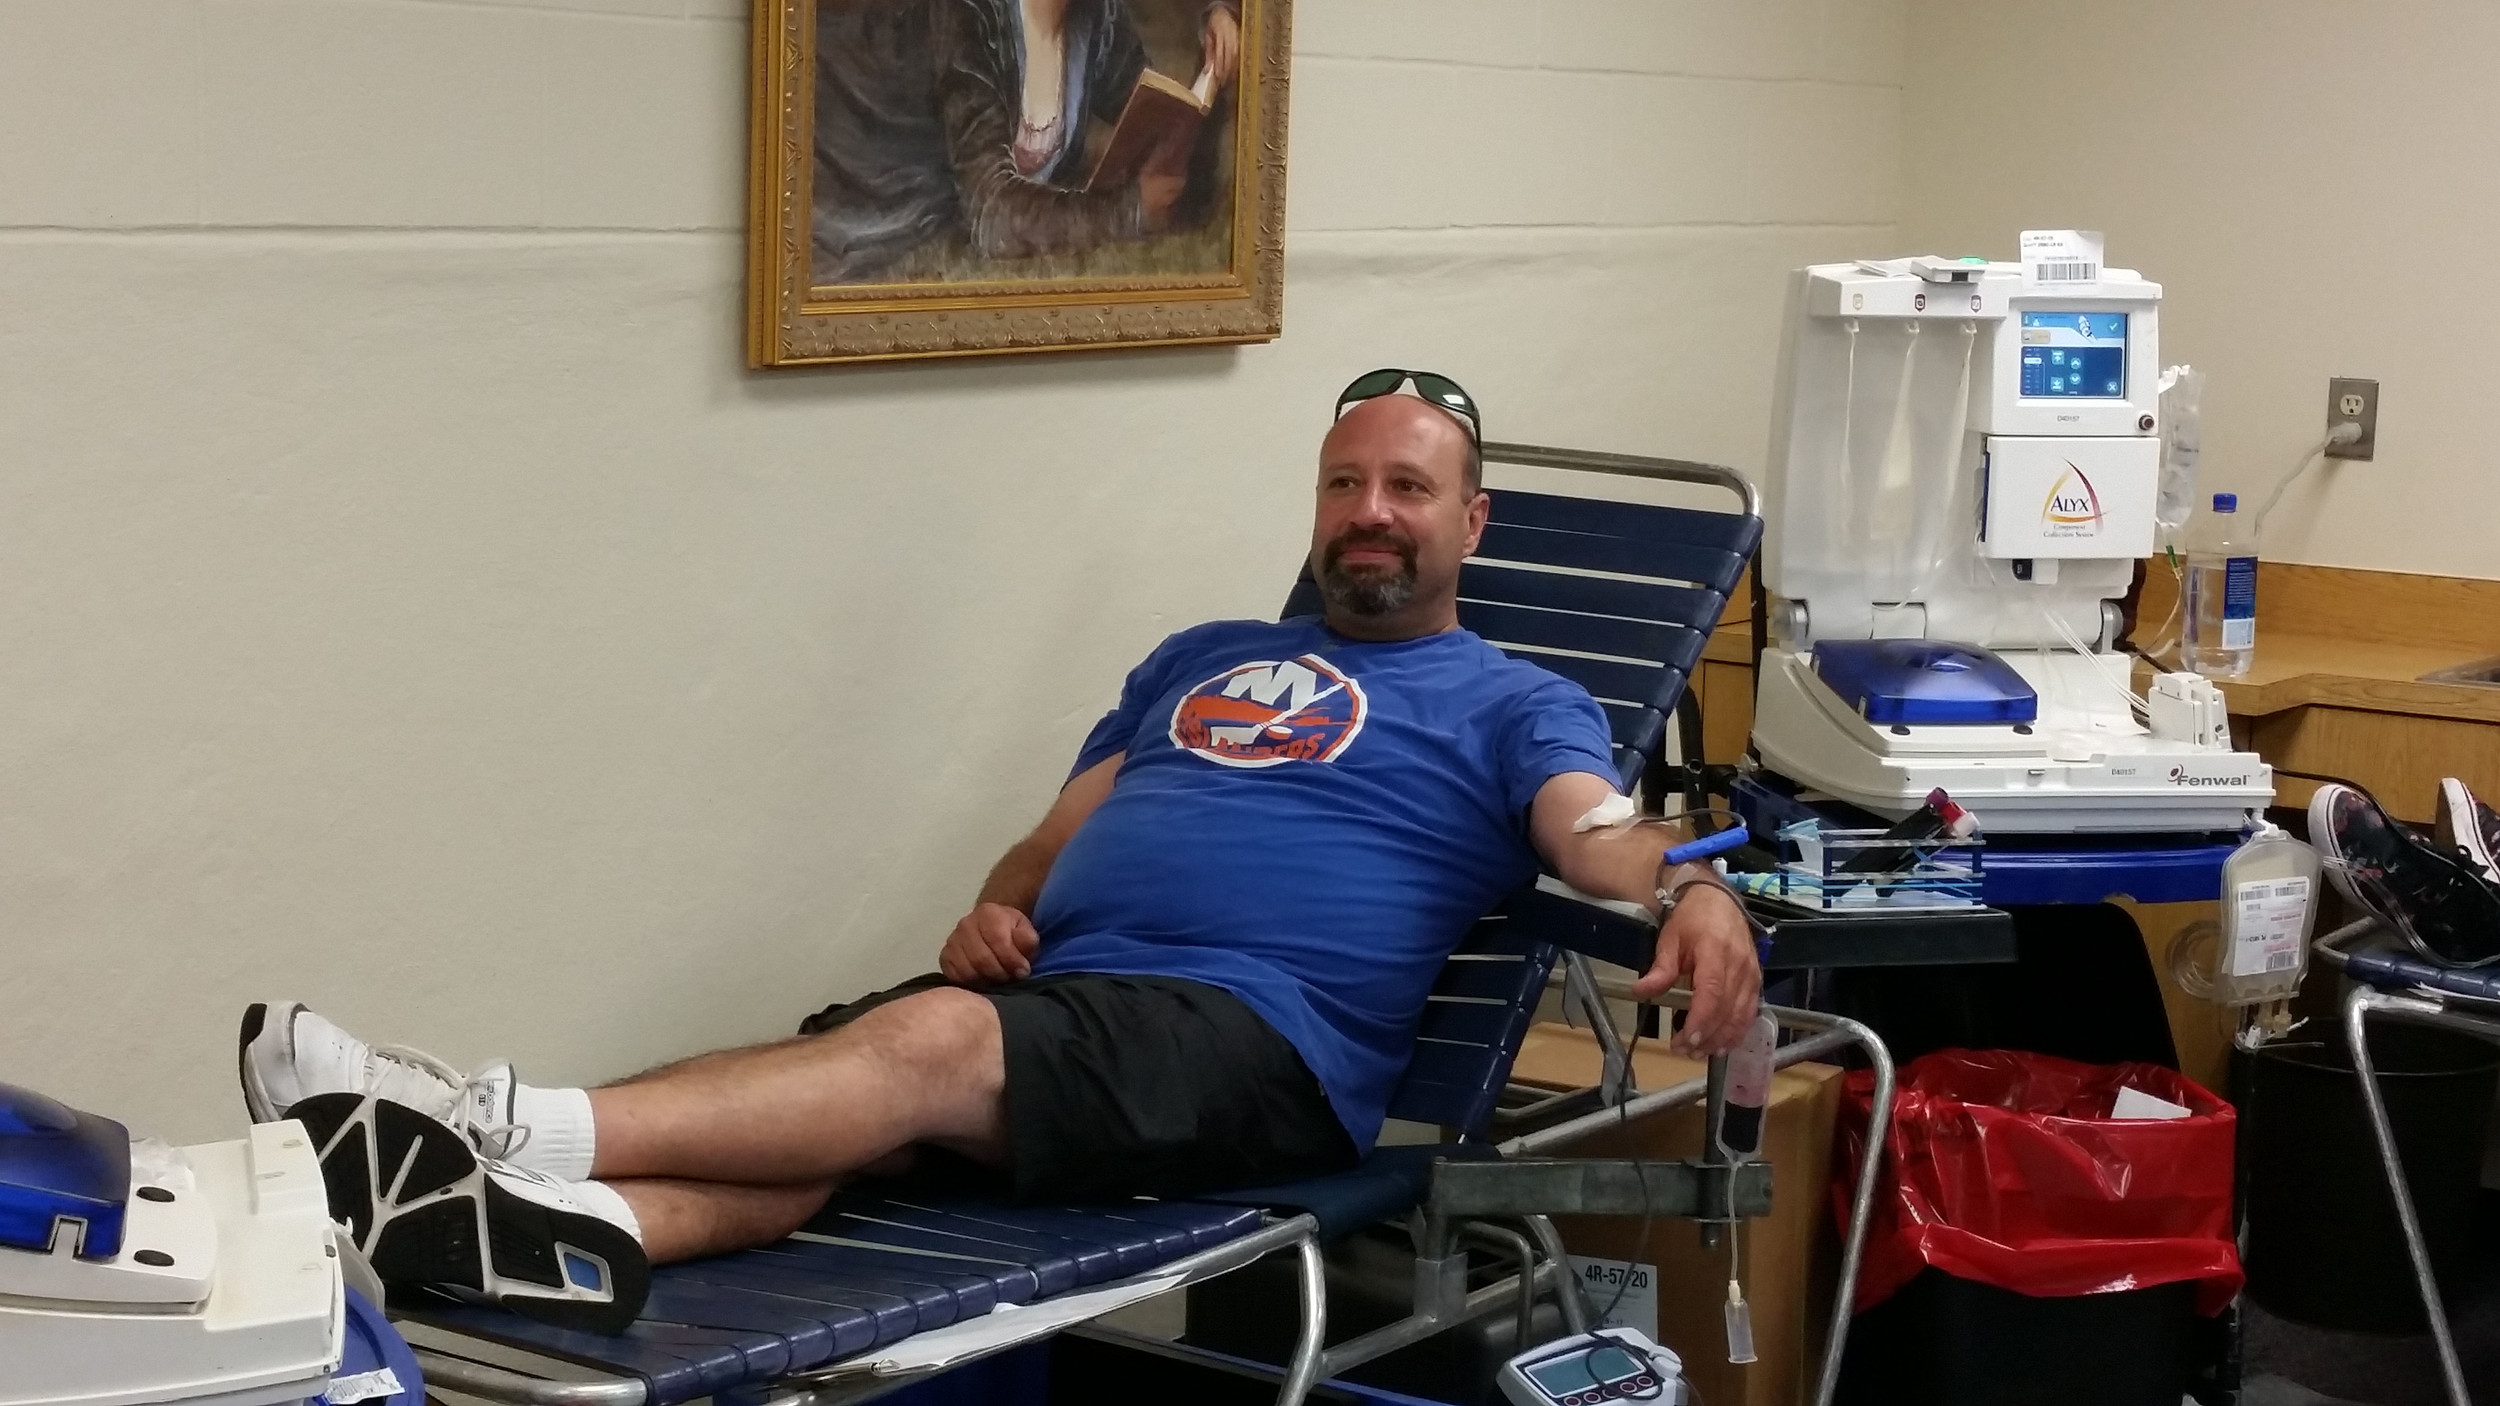 James Hopper gave blood after hearing about the emergency through text alerts.